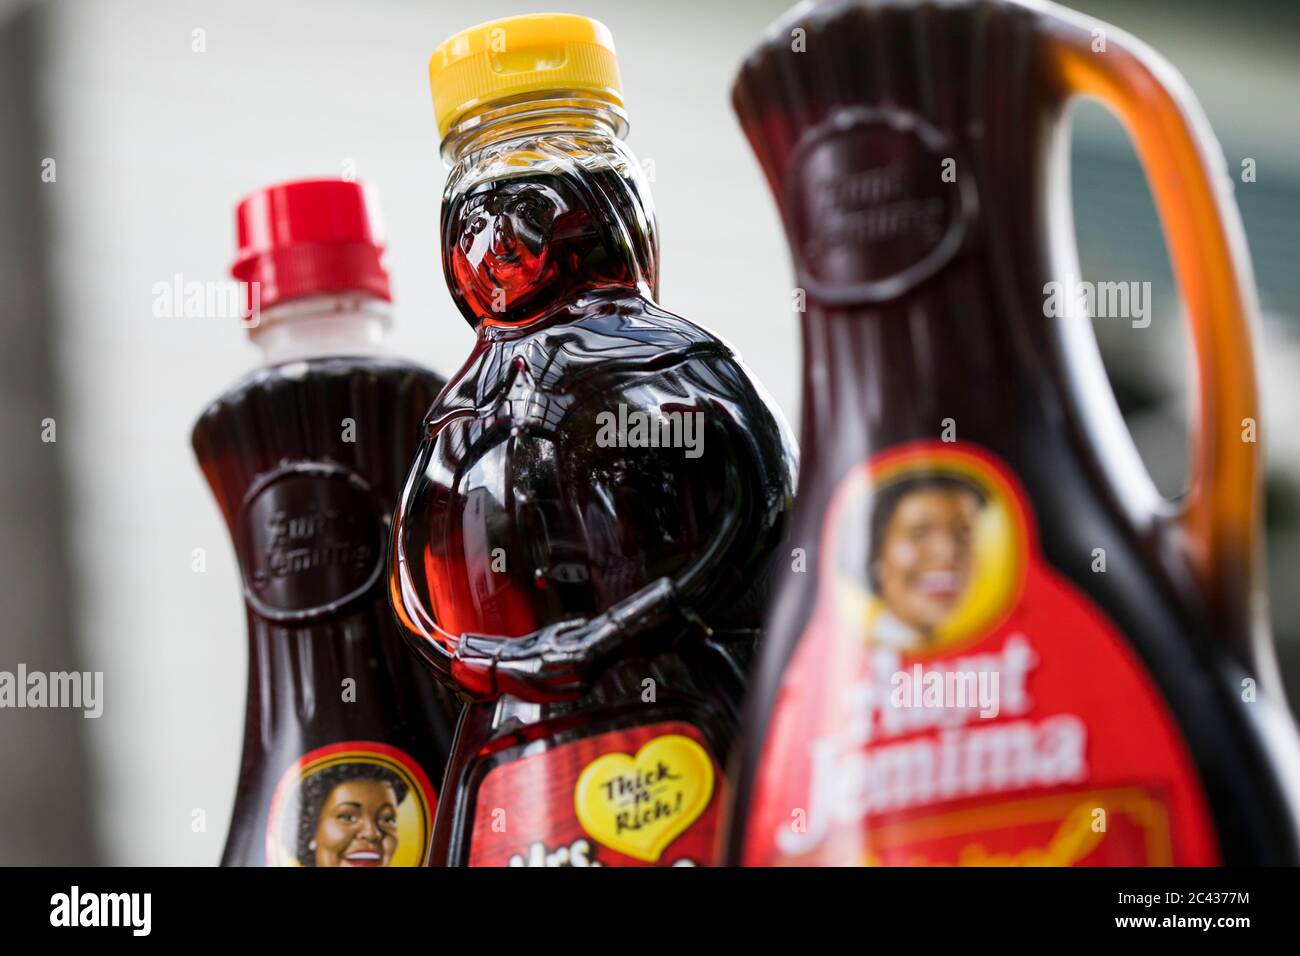 Bottles of Aunt Jemima and Mrs. Butterworth's syrup. Stock Photo